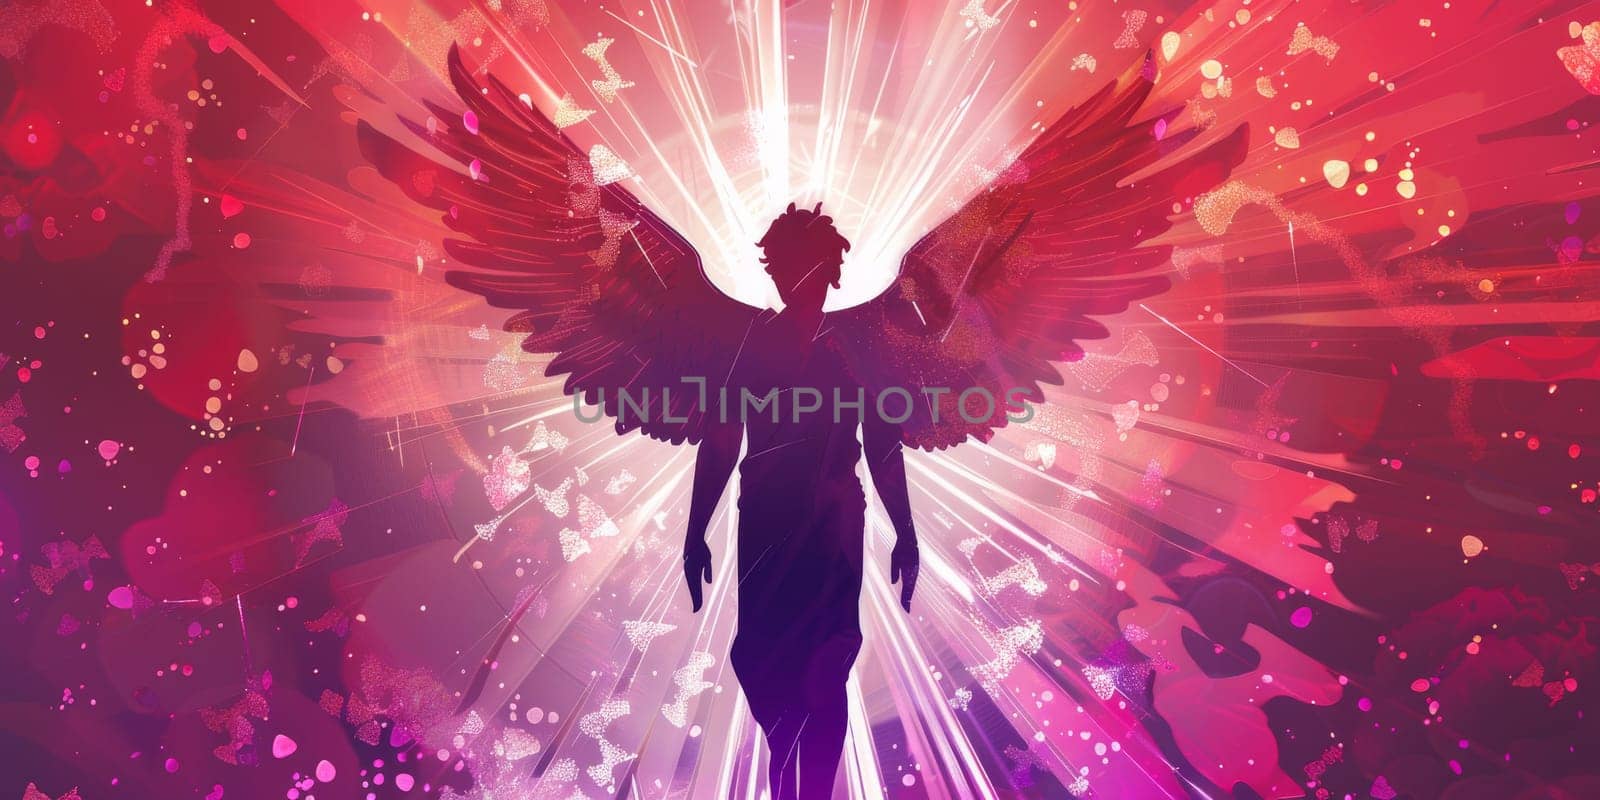 Silhouette of an angel man with red and purple effects around by Kadula